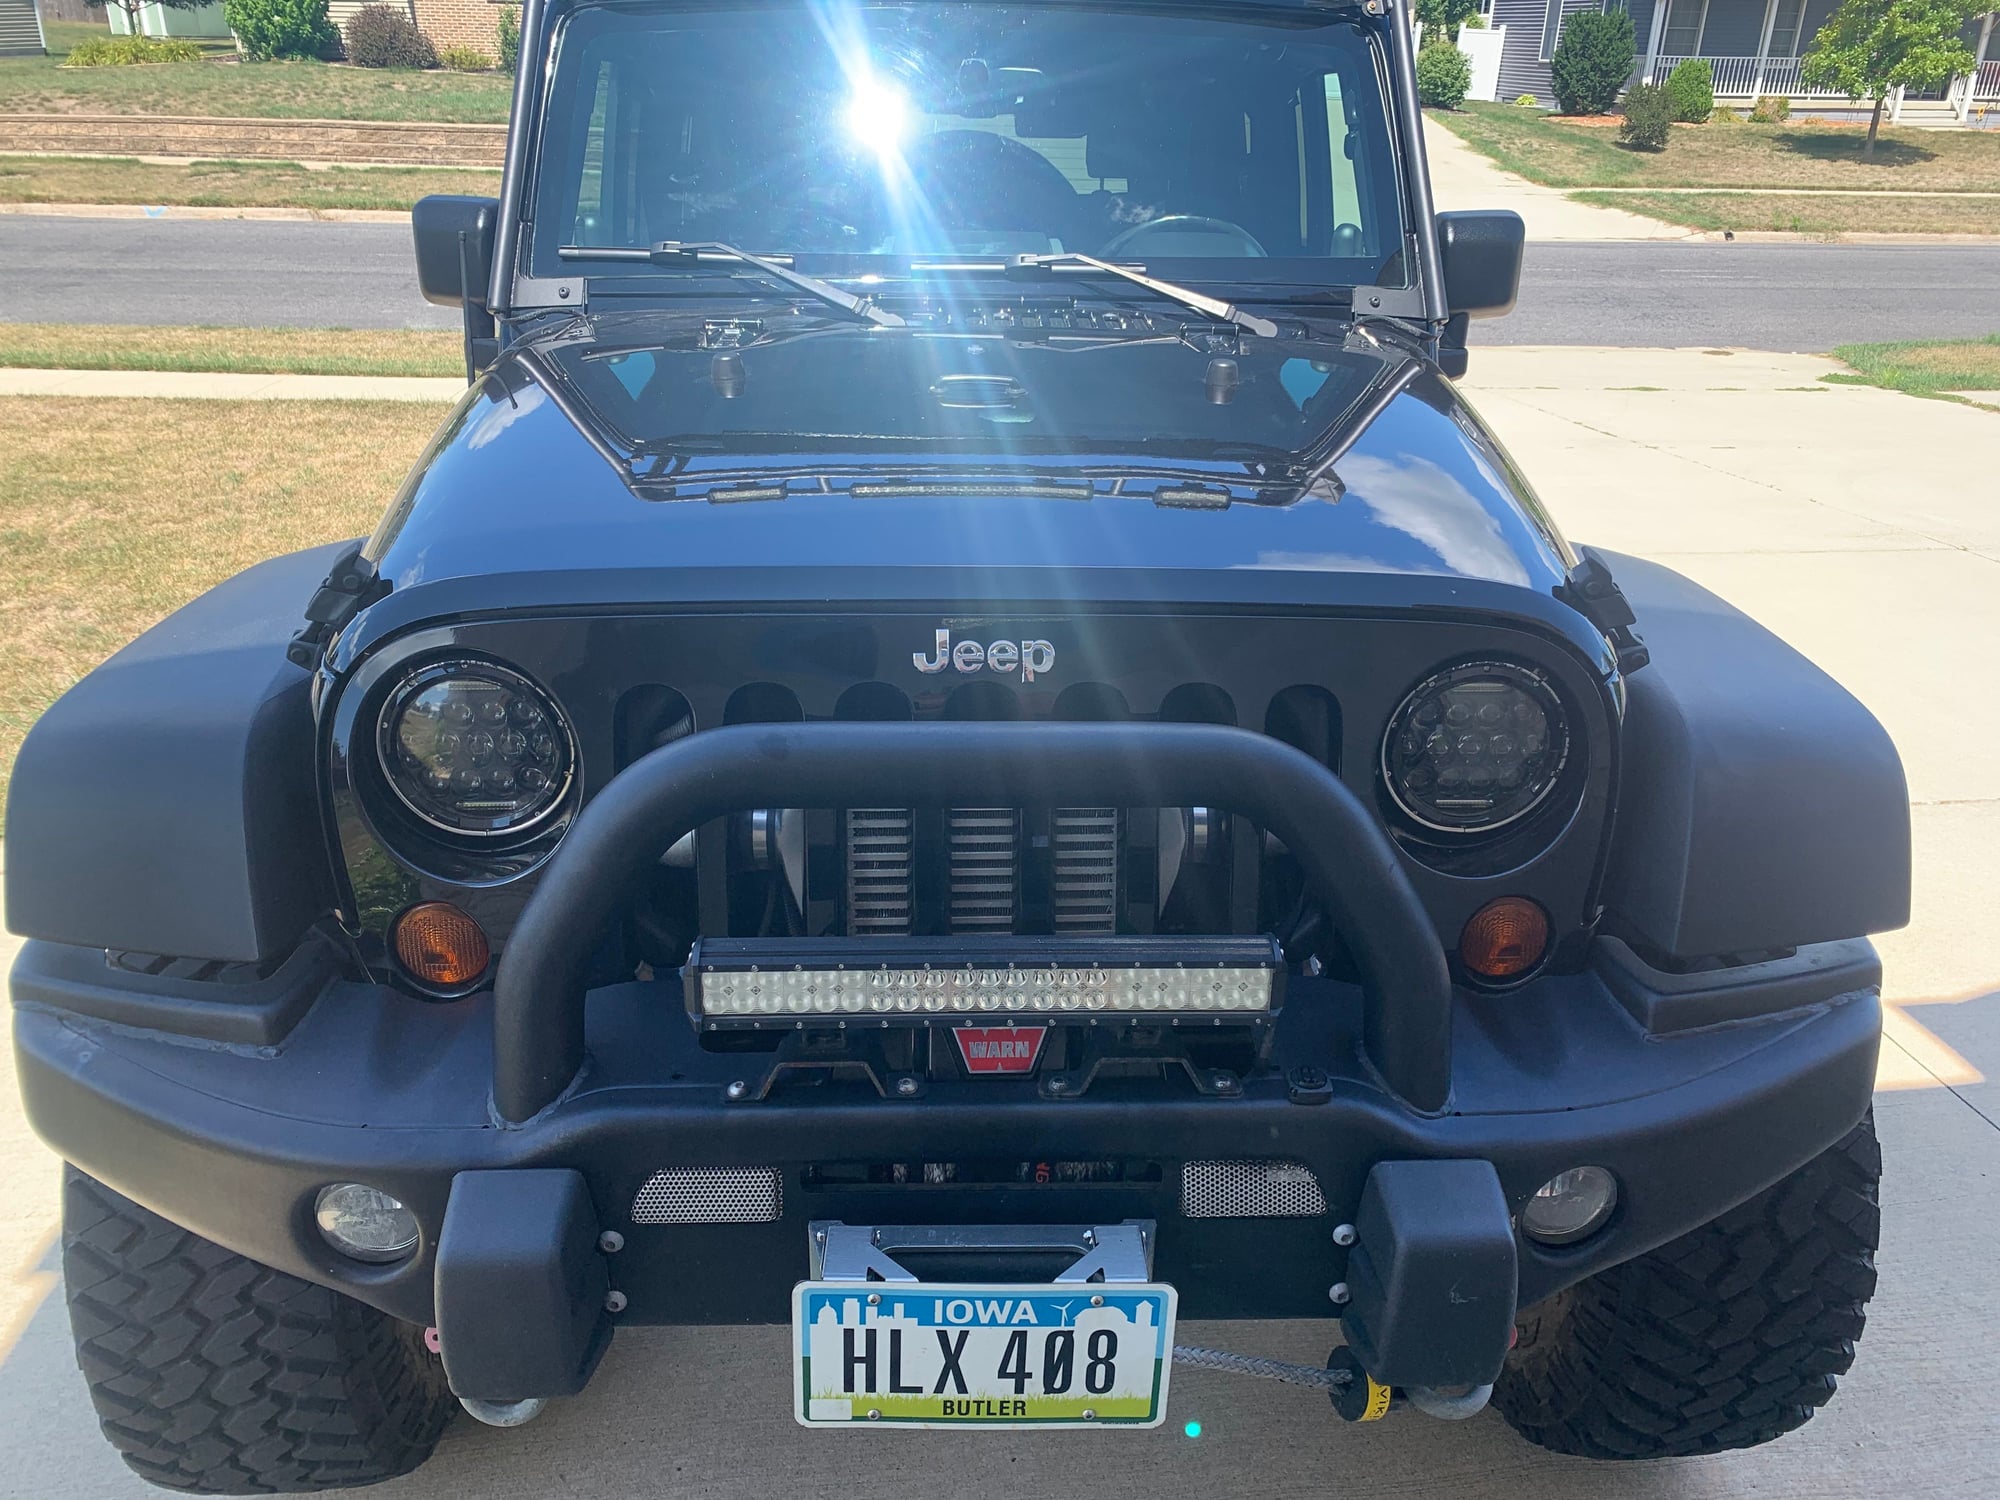 2009 Jeep Rubicon with RIPP Supercharger  - The top  destination for Jeep JK and JL Wrangler news, rumors, and discussion